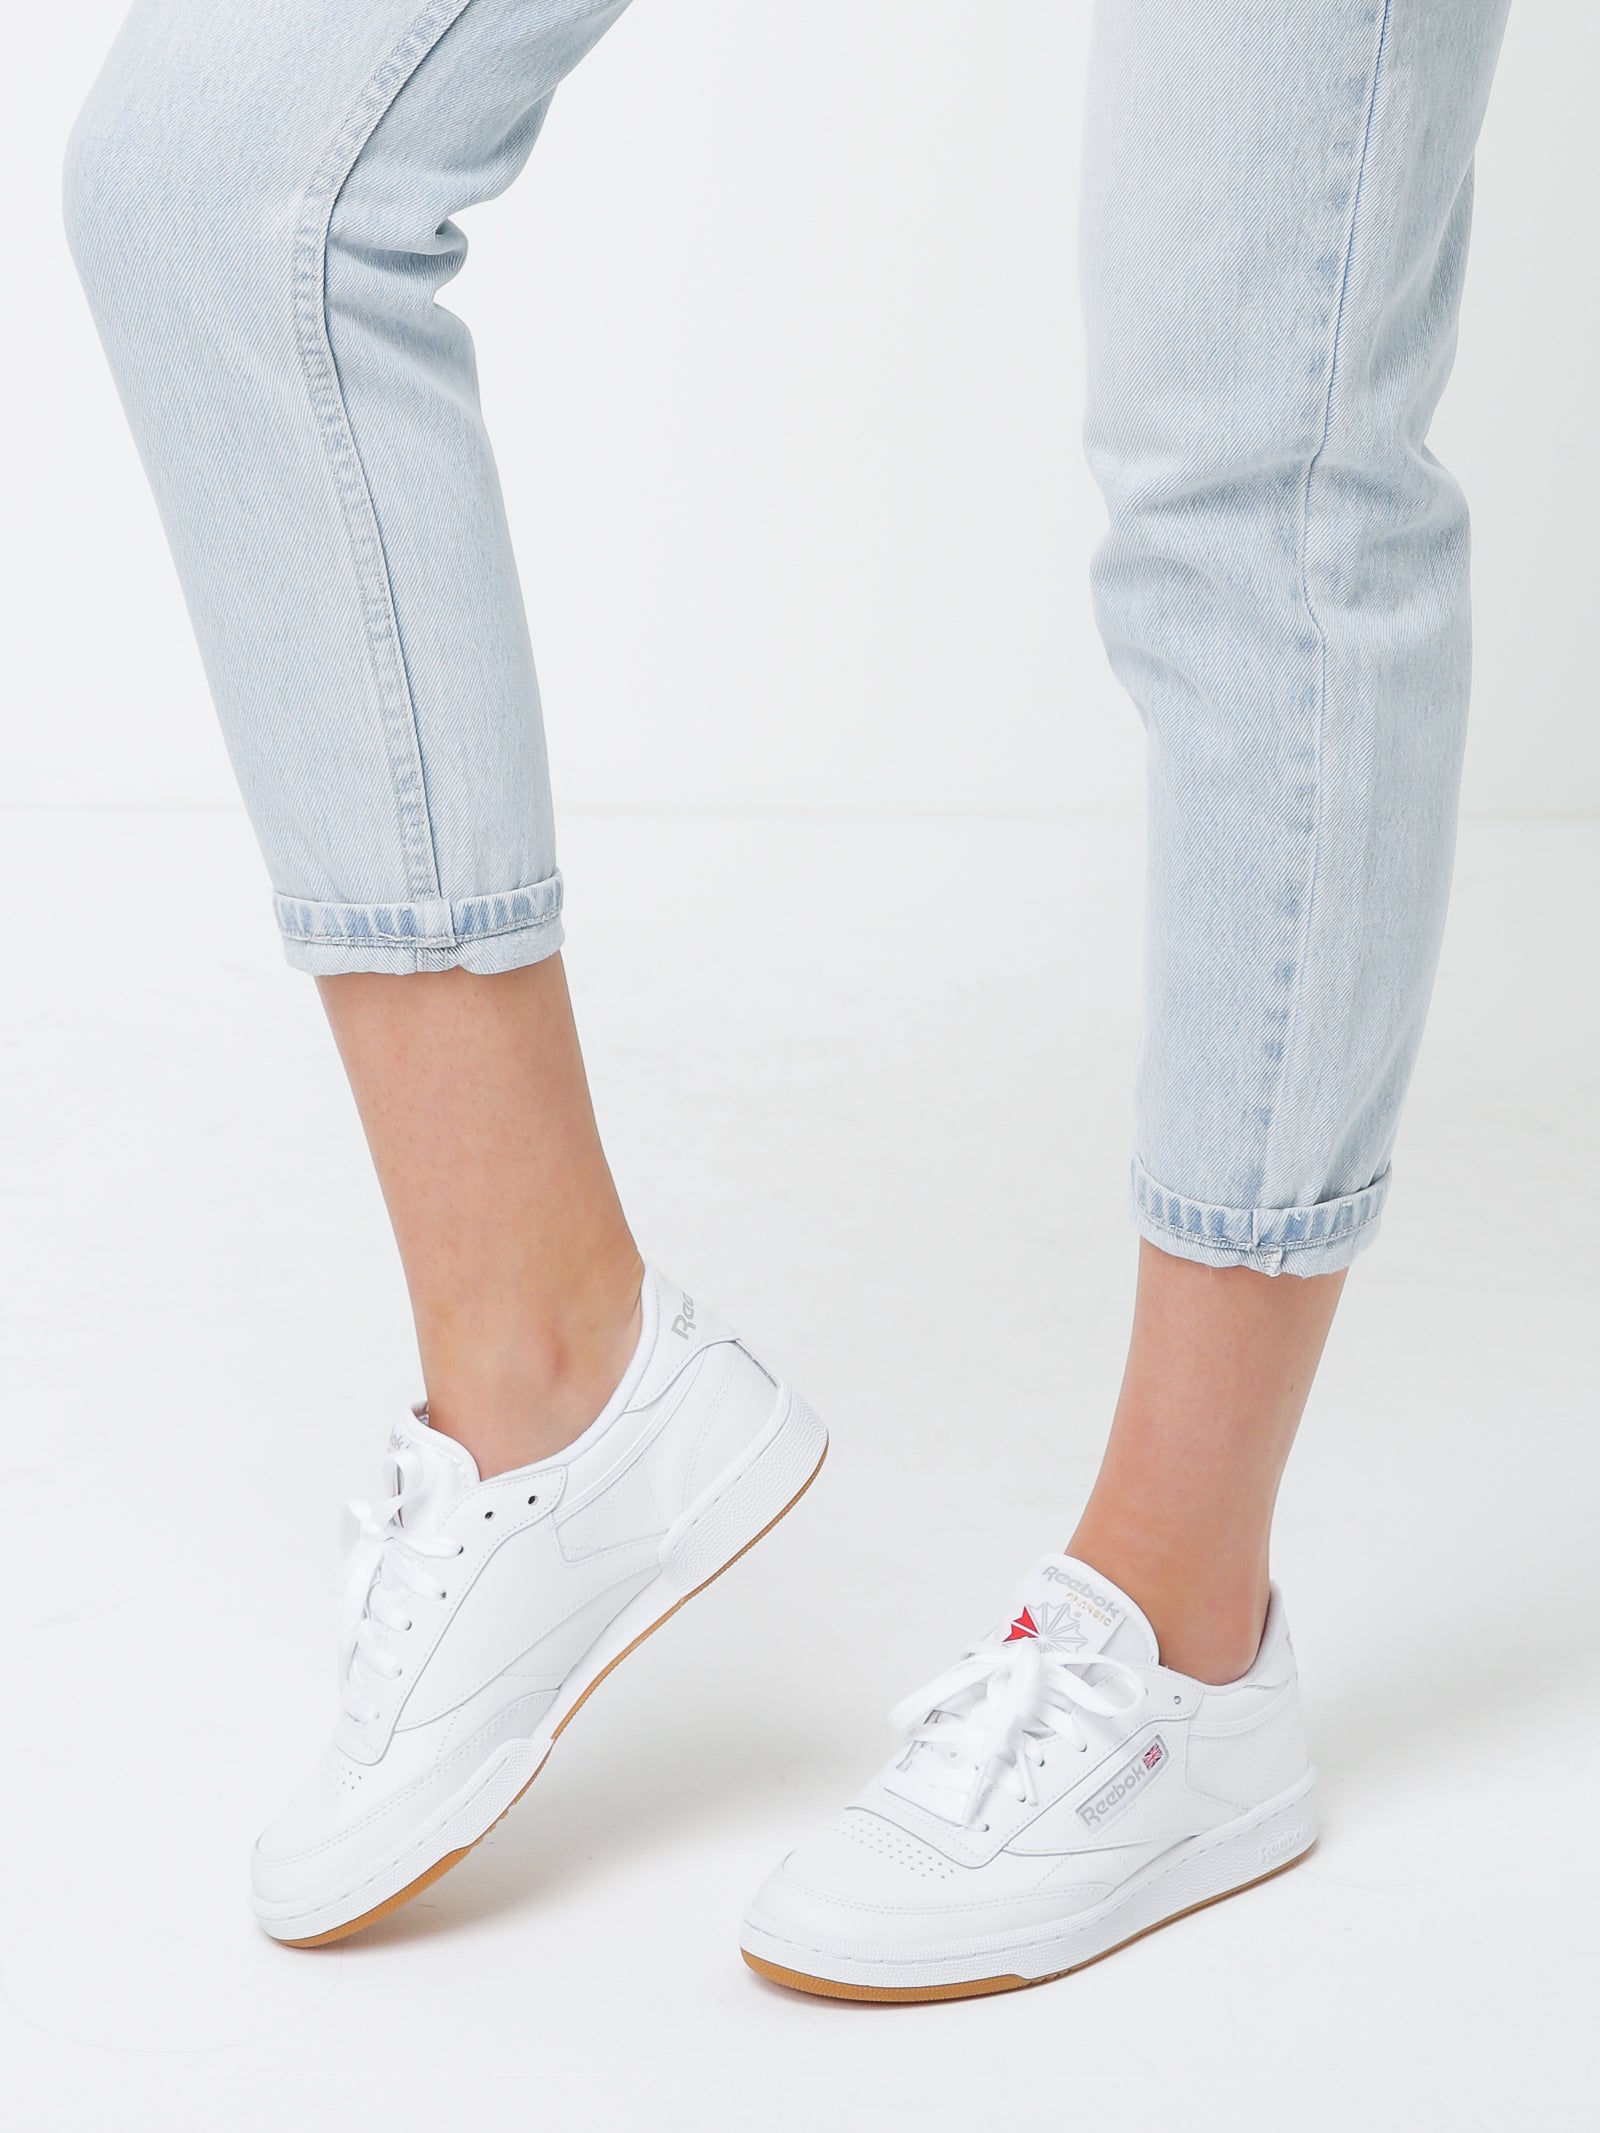 Club C 85 Sneakers in White Leather 